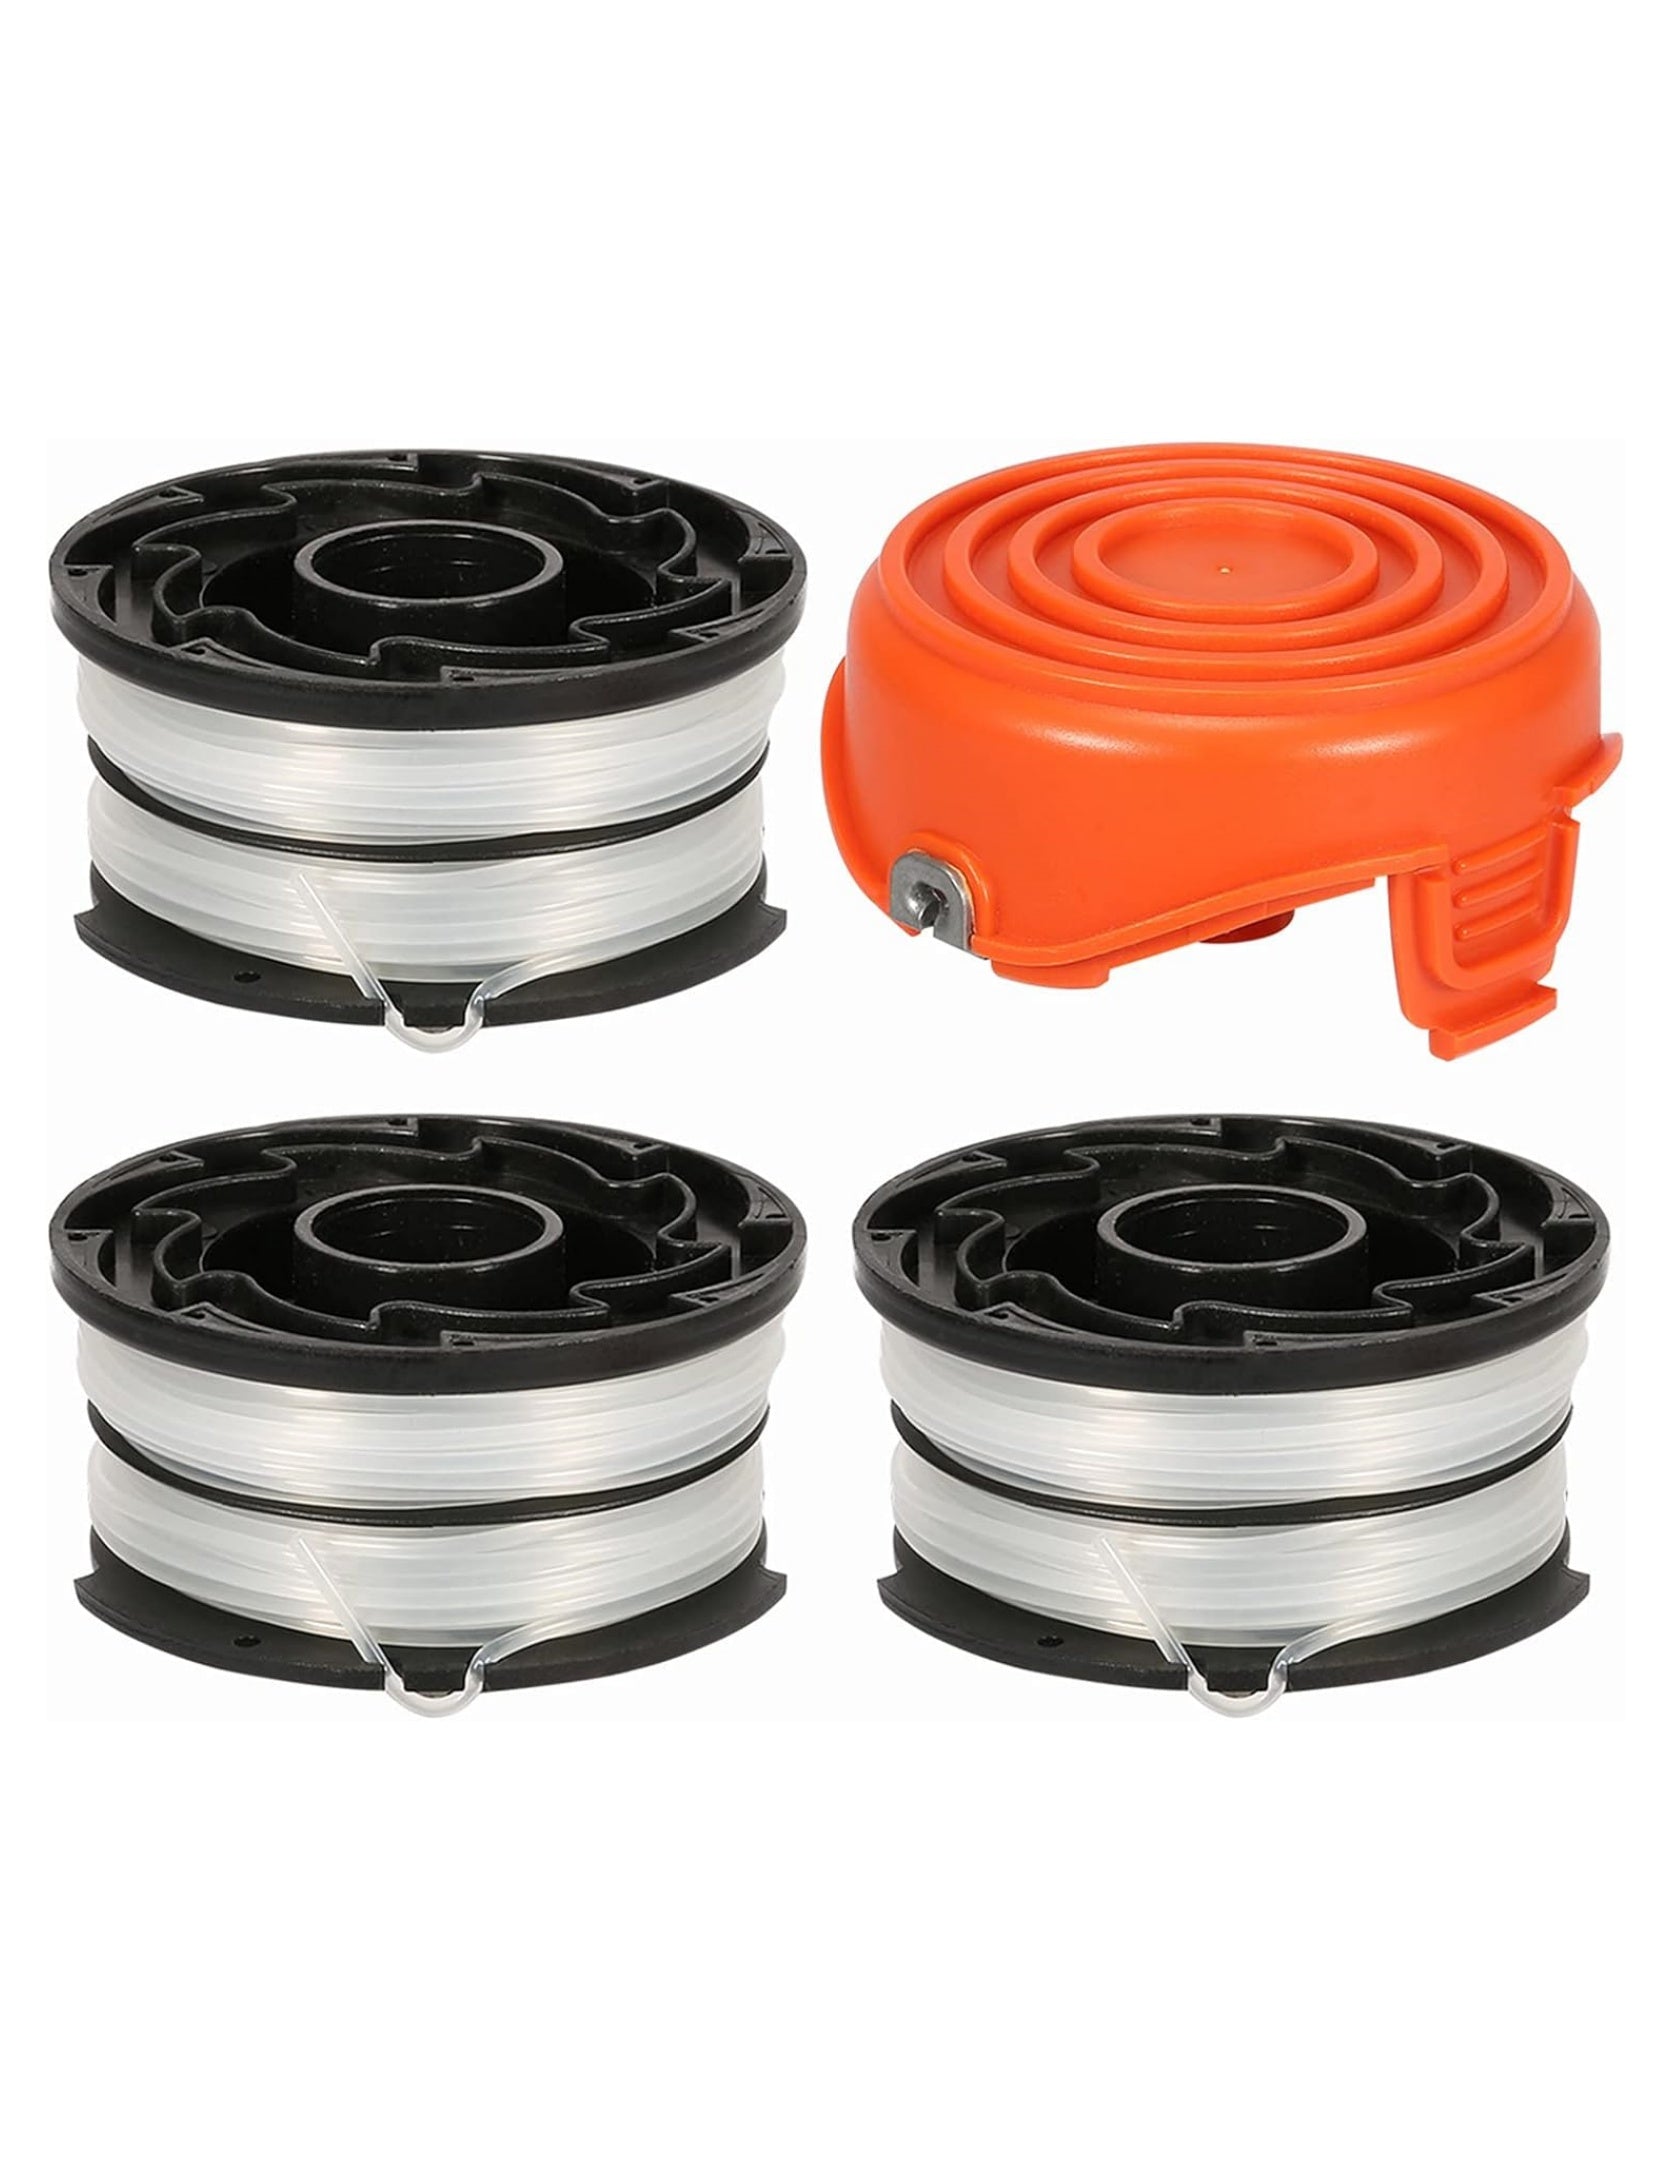 THTEN DF-065 String Trimmer Spools Compatible with Black and Decker GH710 GH700 GH750 RC-065, DF-065-BKP Weed Eater Refills Line 36ft 0.065 Auto-Feed Dual Line Edger+ RC-065-P Spool Cover Cap 3+1